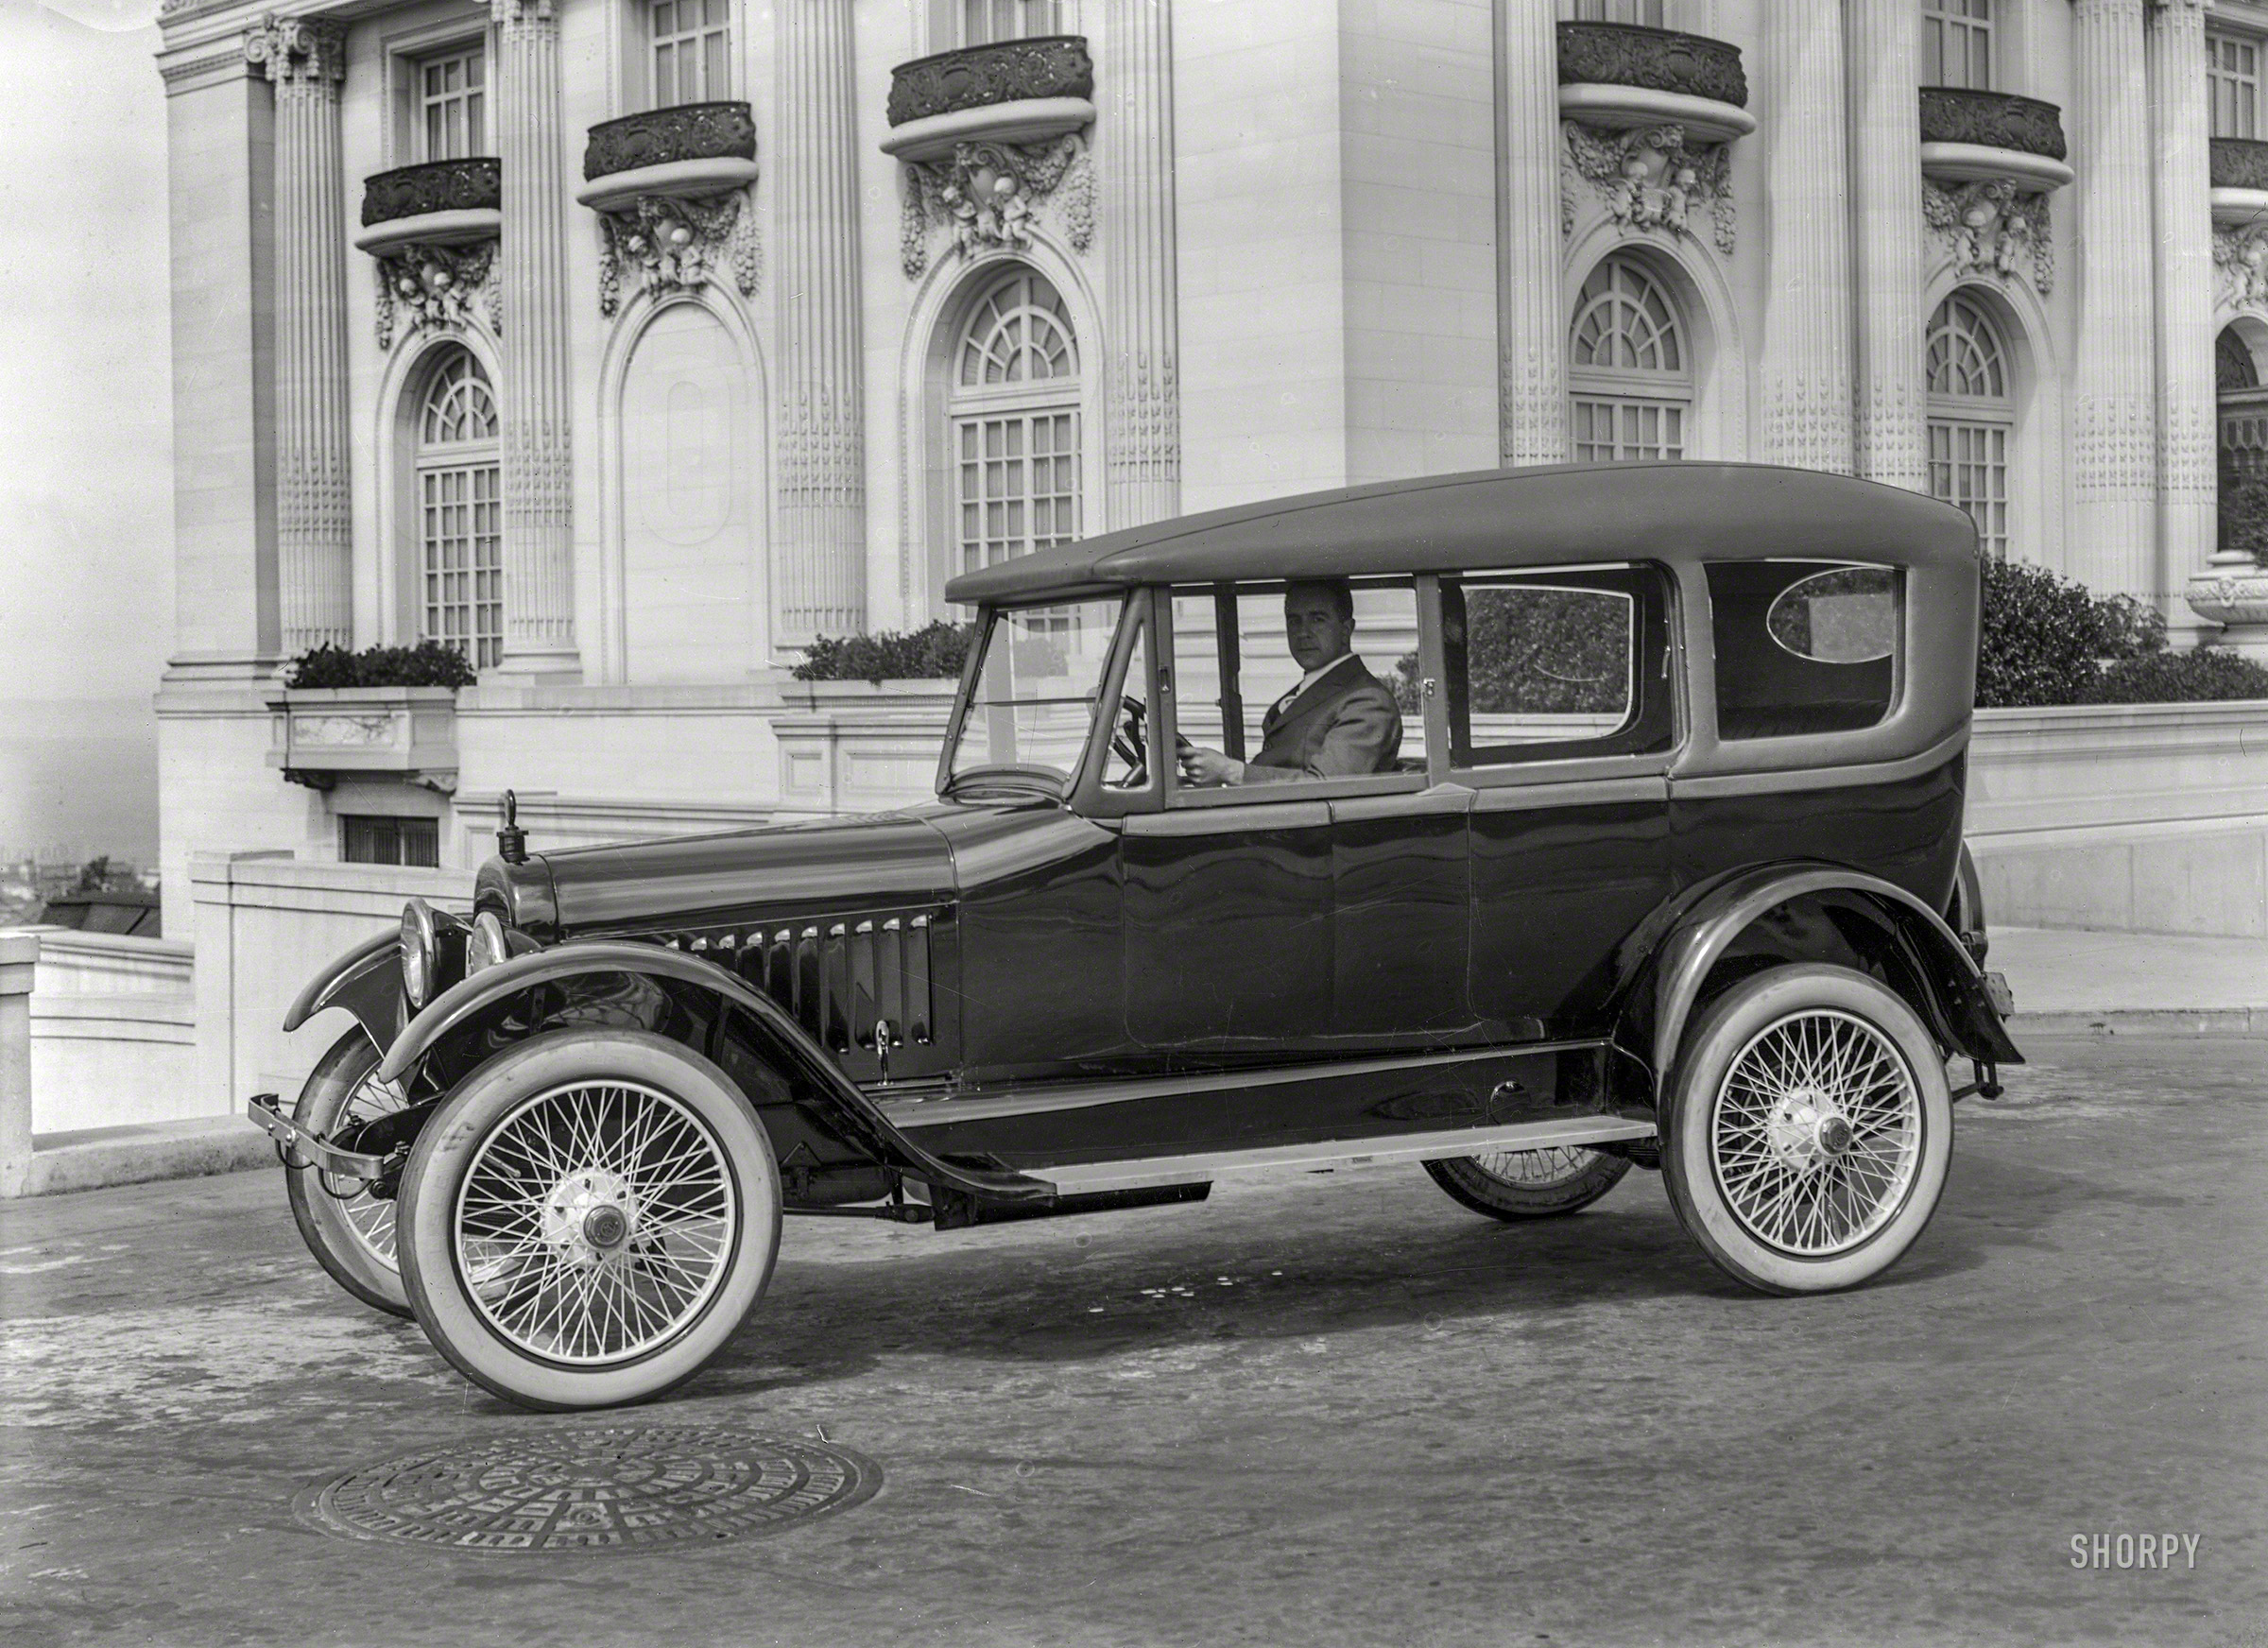 San Francisco circa 1920. "Chalmers touring car at Spreckels Mansion, N.E. corner Octavia & Washington streets." Wearing yet another variation on the "California top," an accessory (this one with sideways-sliding windows) that afforded some of the advantages of the era's heavier, more expensive closed-body models. 5x7 inch glass negative by Christopher Helin. View full size.